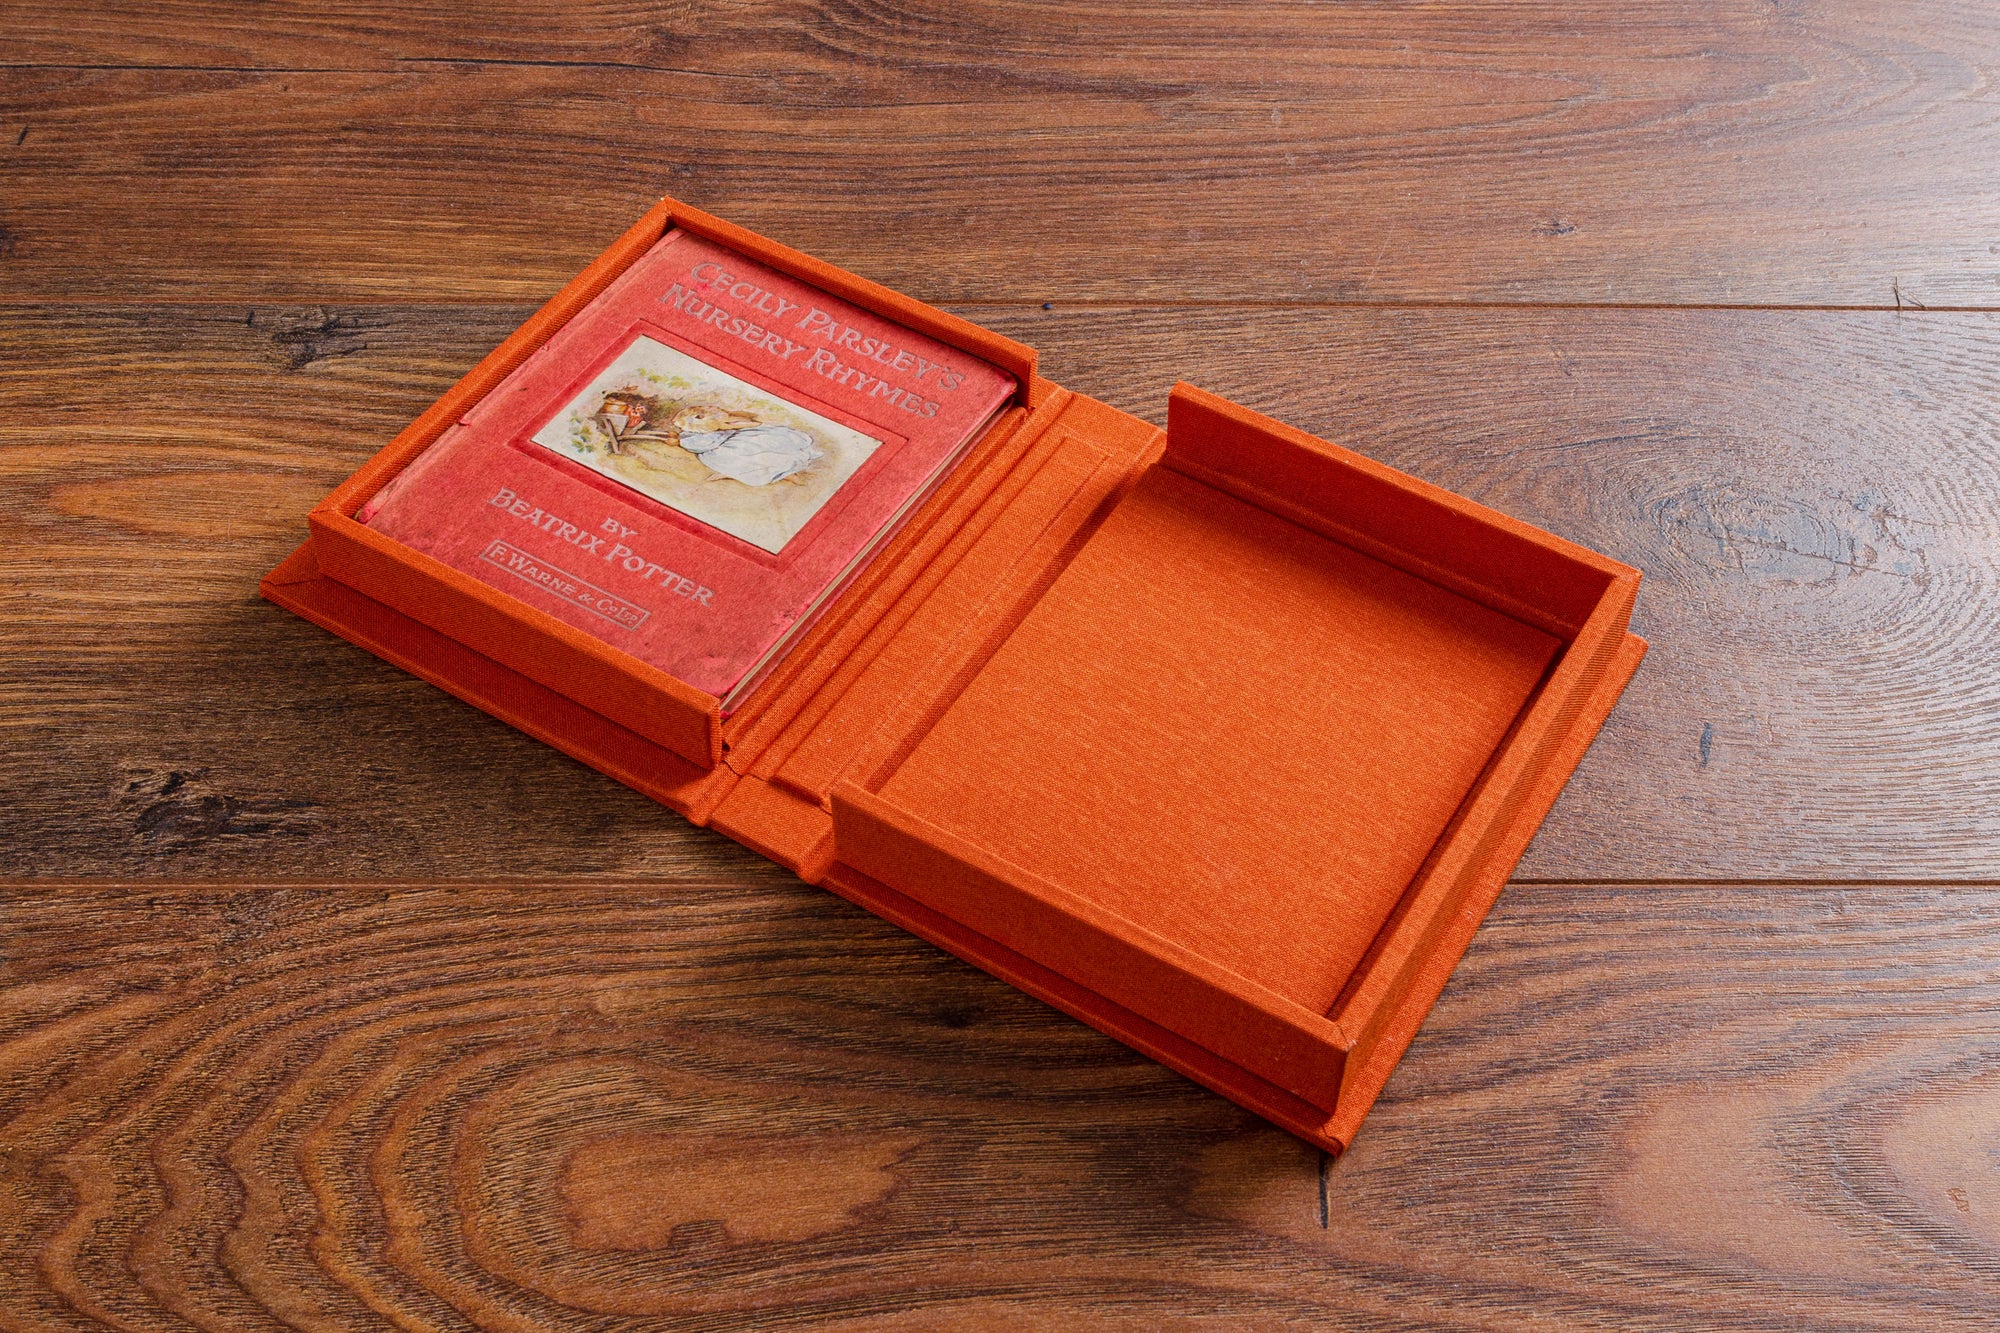 Hand made book collectors dust cover